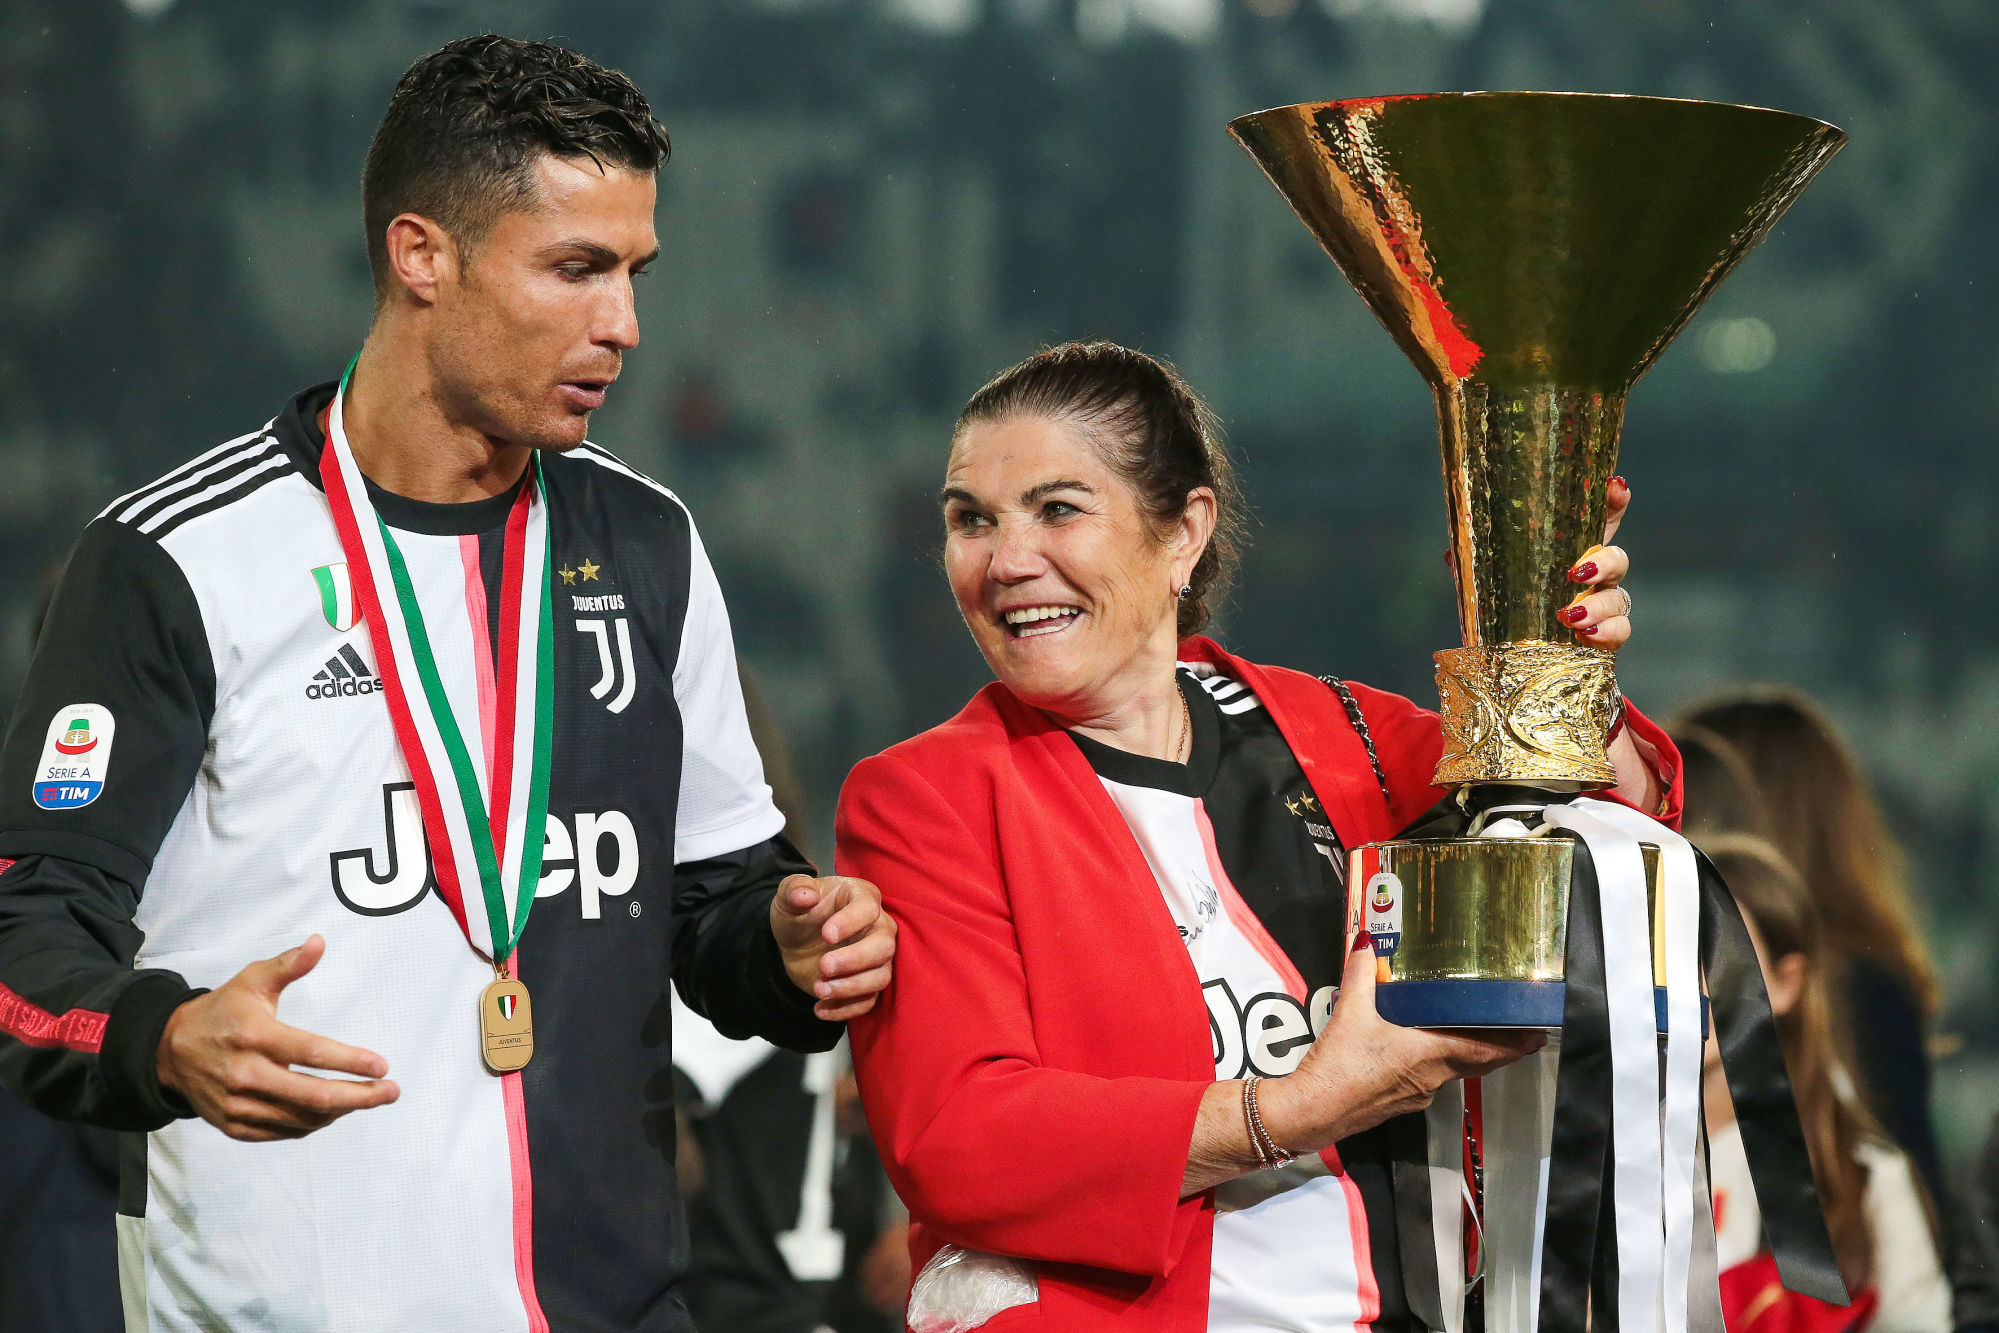 Cristiano Ronaldo of Juventus and his mother Maria Dolores dos Santos Aveiro pictured with the trophy following the Serie A match at Allianz Stadium, Turin. Picture date: 19th May 2019. Photo : Spi / Icon Sport